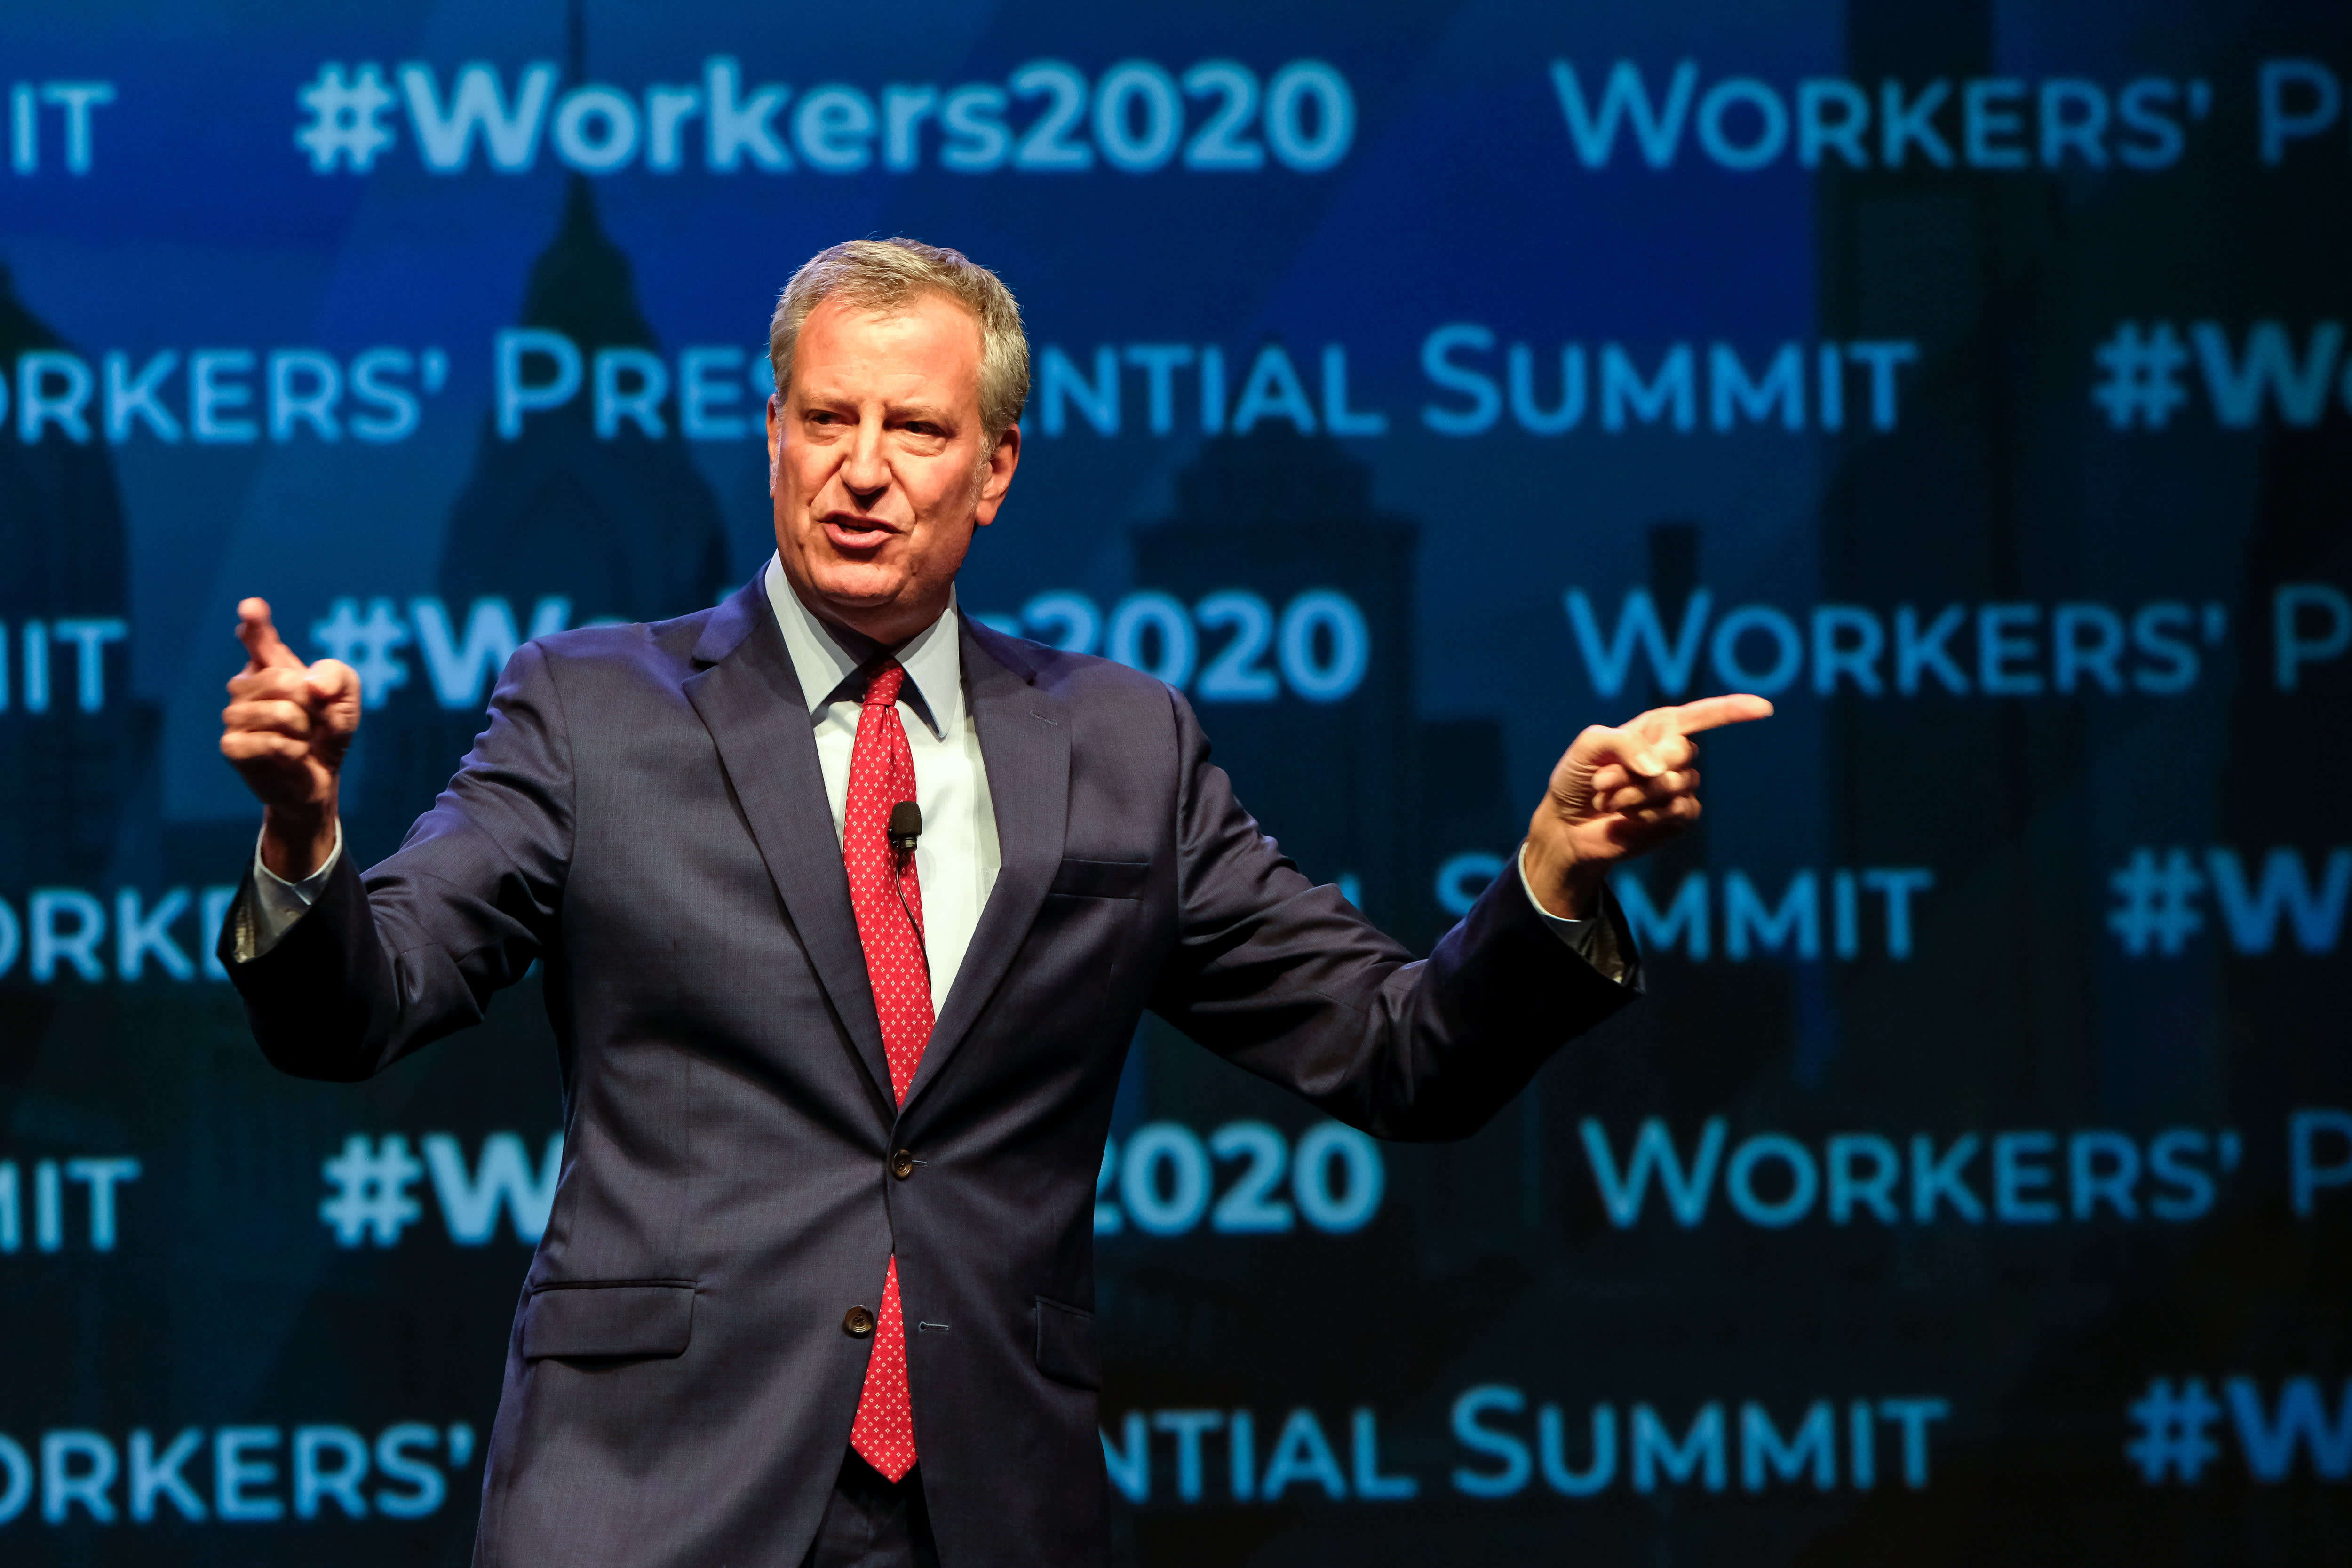 Bill de Blasio hasn’t repaid NYC funds he used for his failed presidential campaign investigators say – CNBC